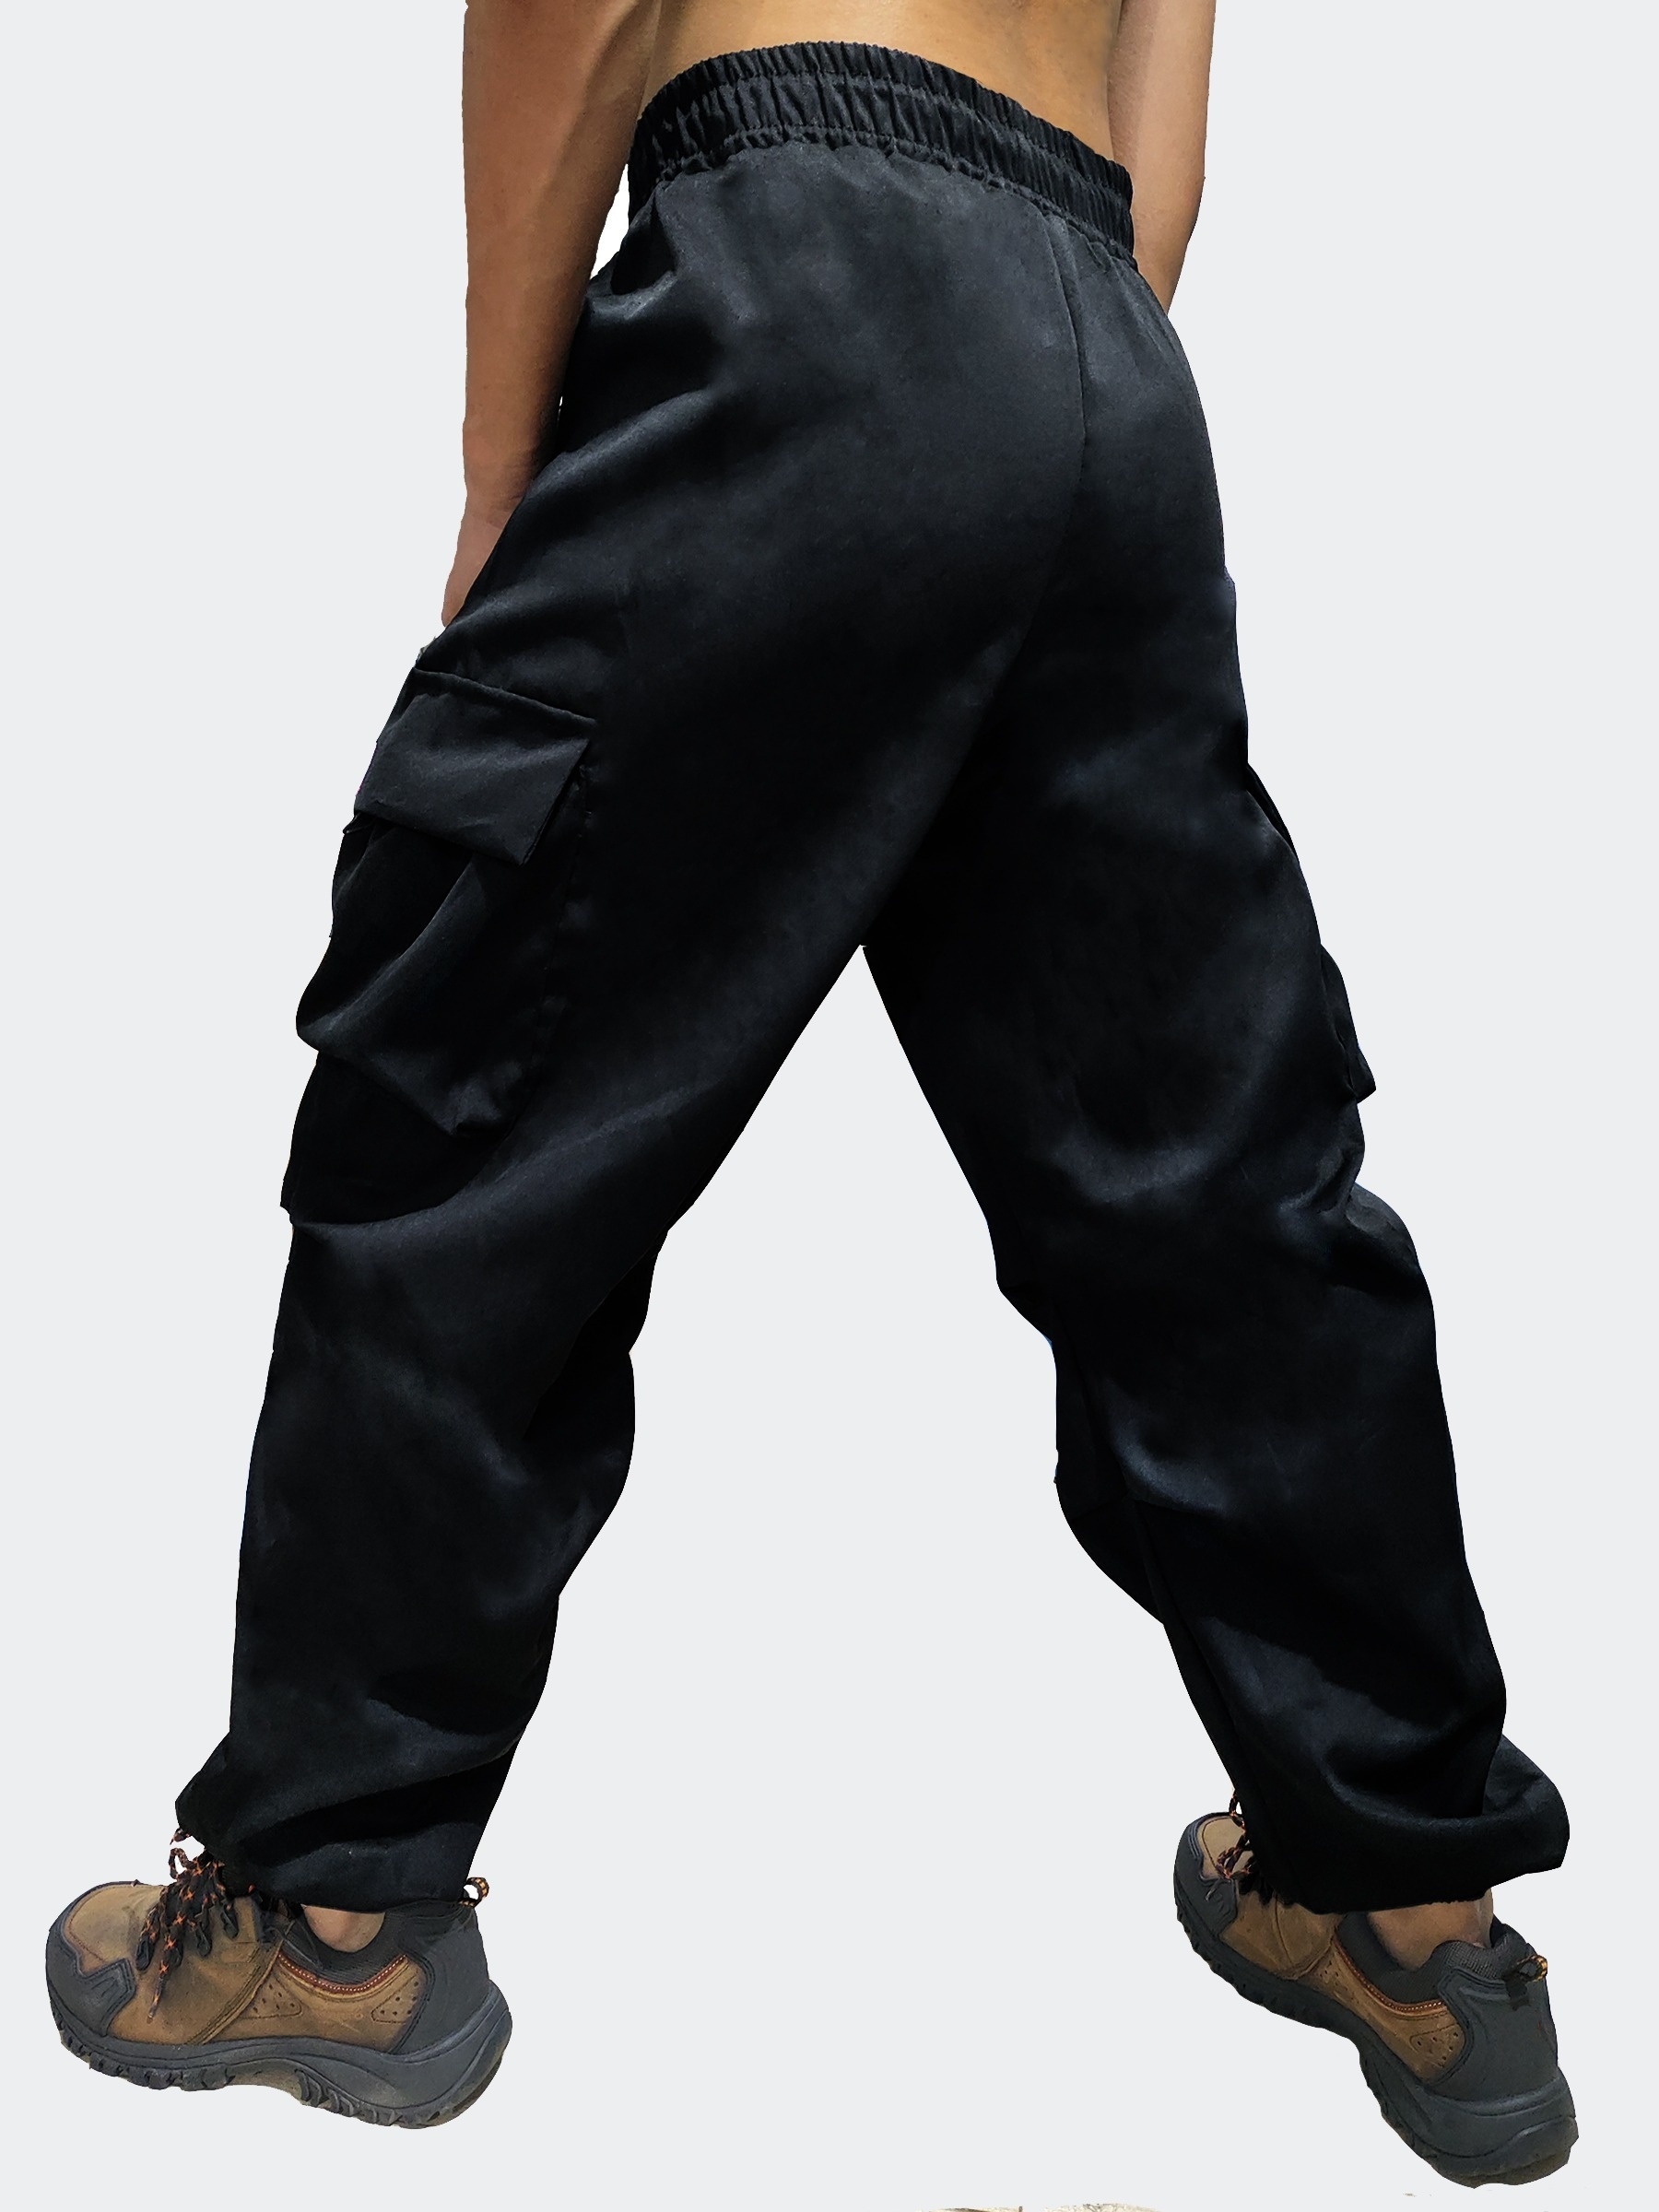 Plus Size Men's Solid Cargo Pants Oversized Fashion Street Style Pants With  Pockets For Spring Fall, Men's Clothing